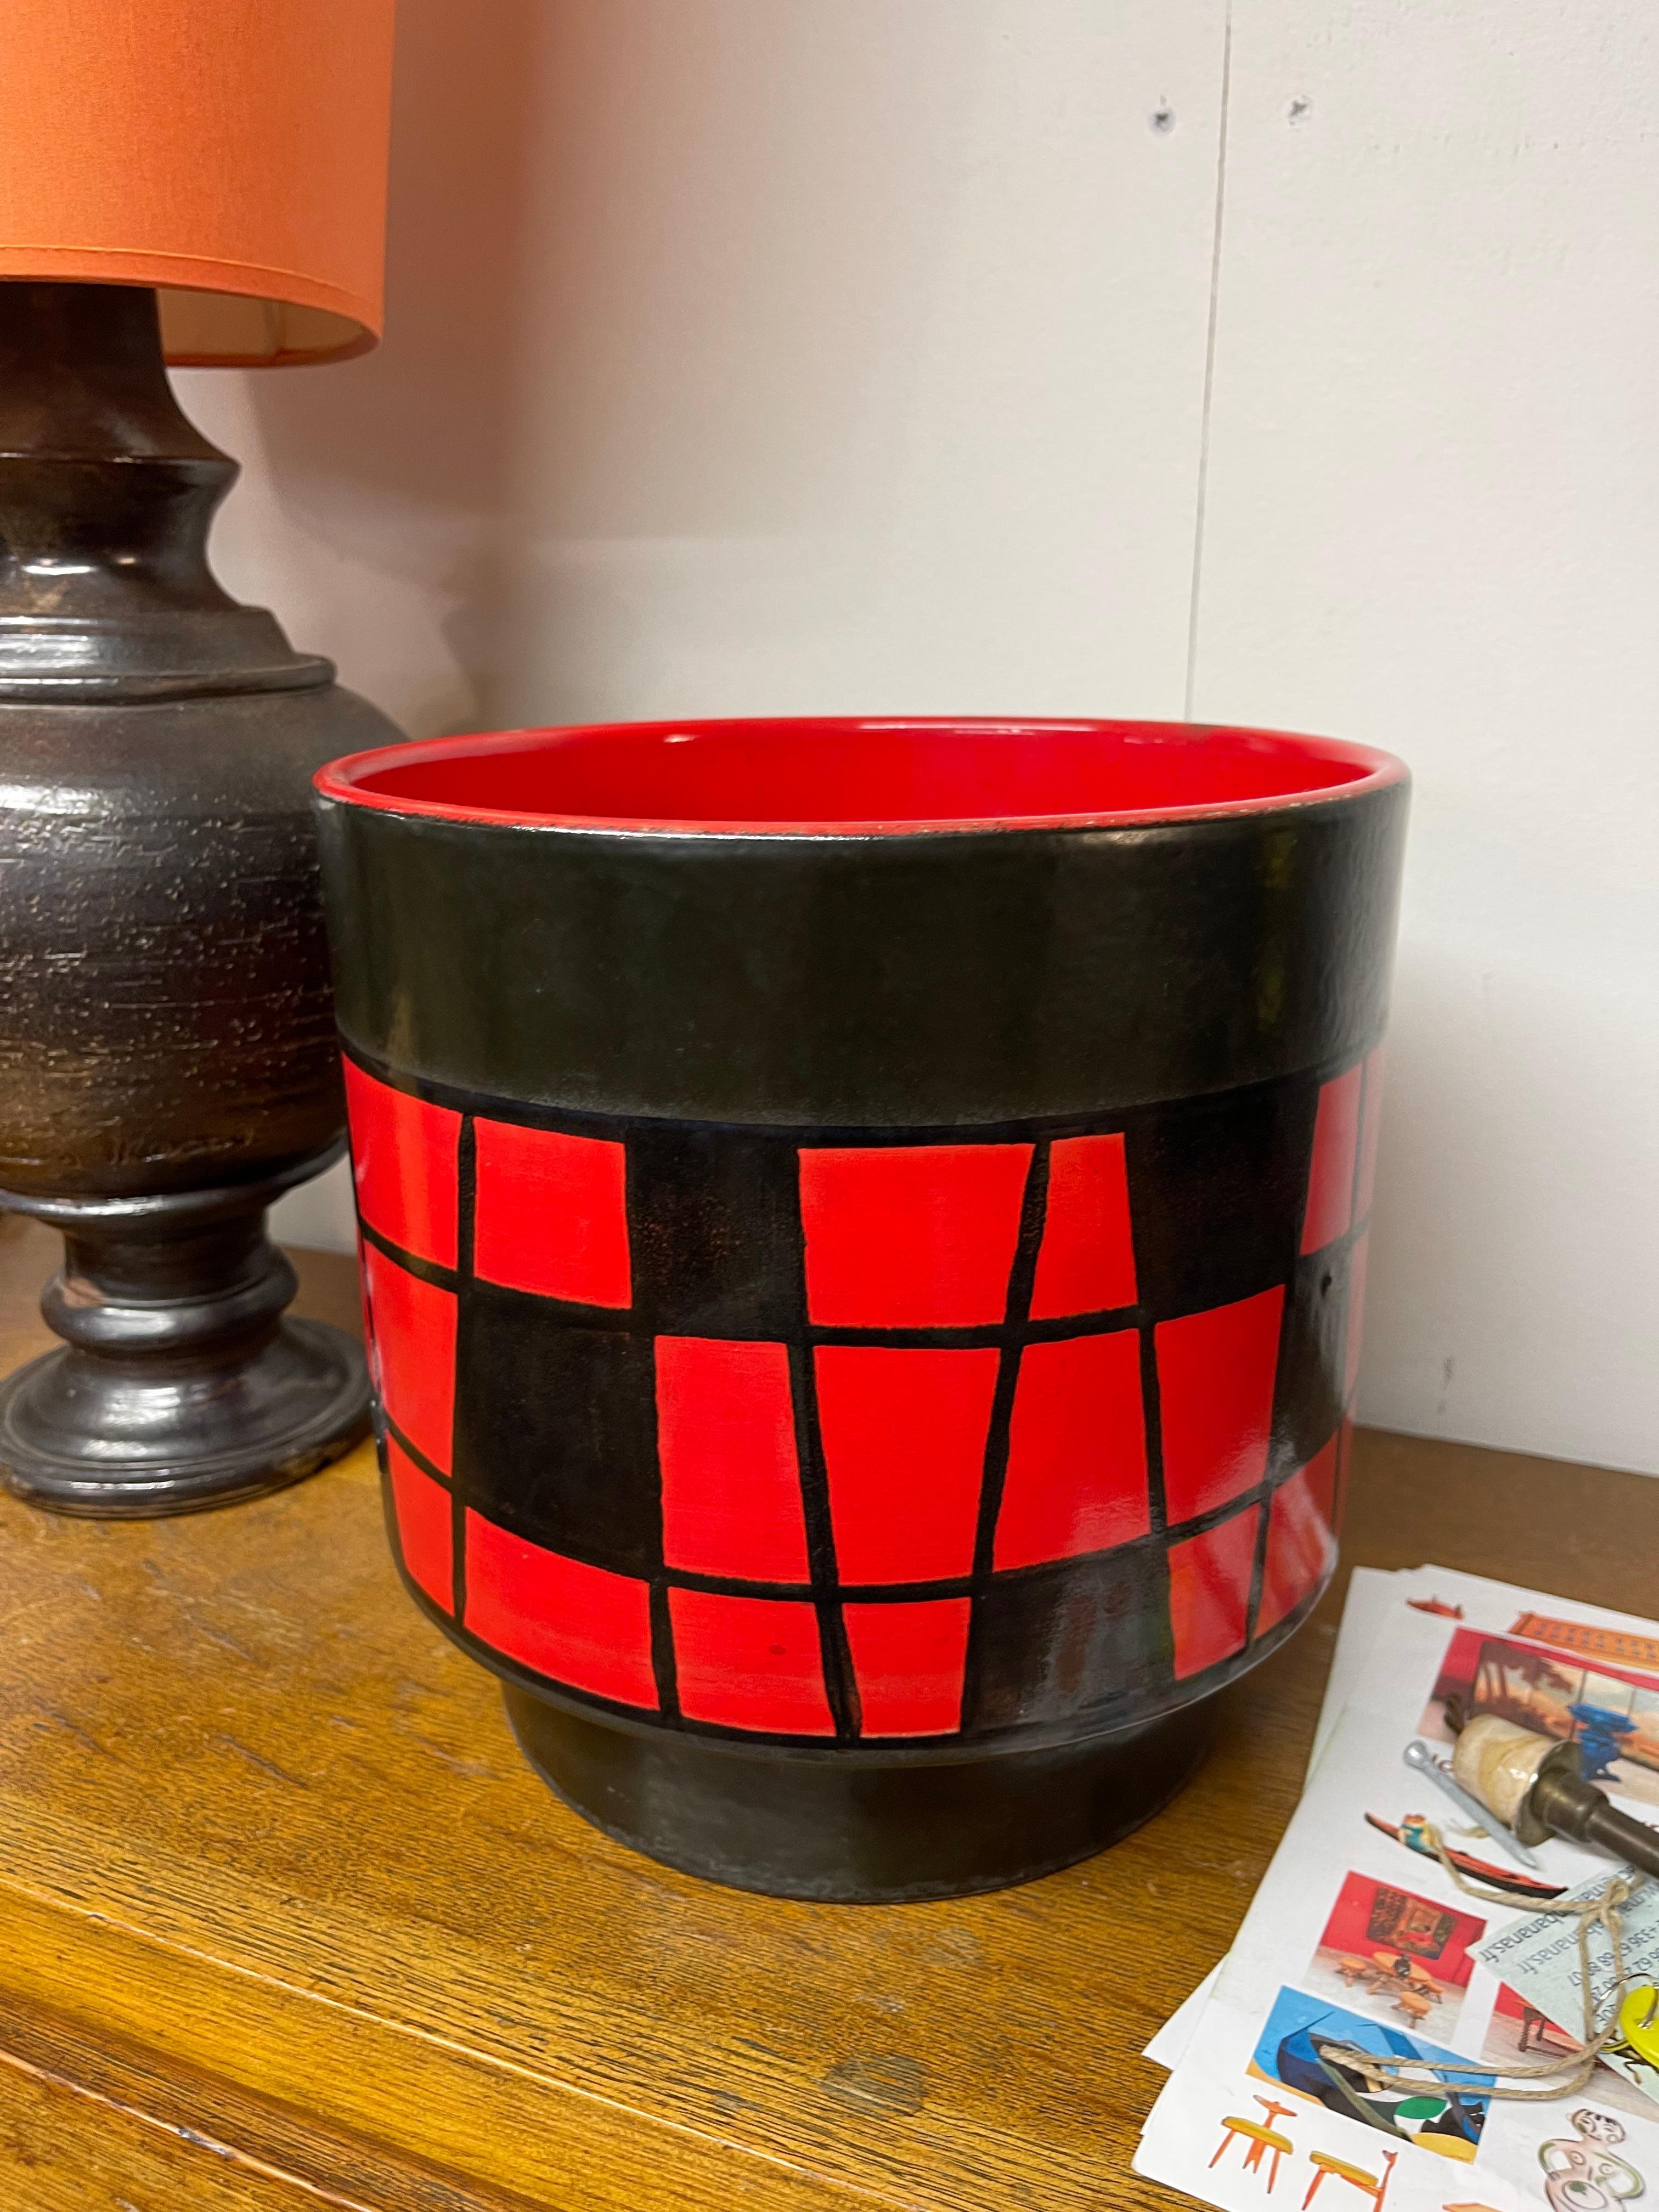 An Elchinger large black and red pot cover
Elchinger is a ceramic manufacture from Soufflenheim in Alsace France from 1834 to 2016.